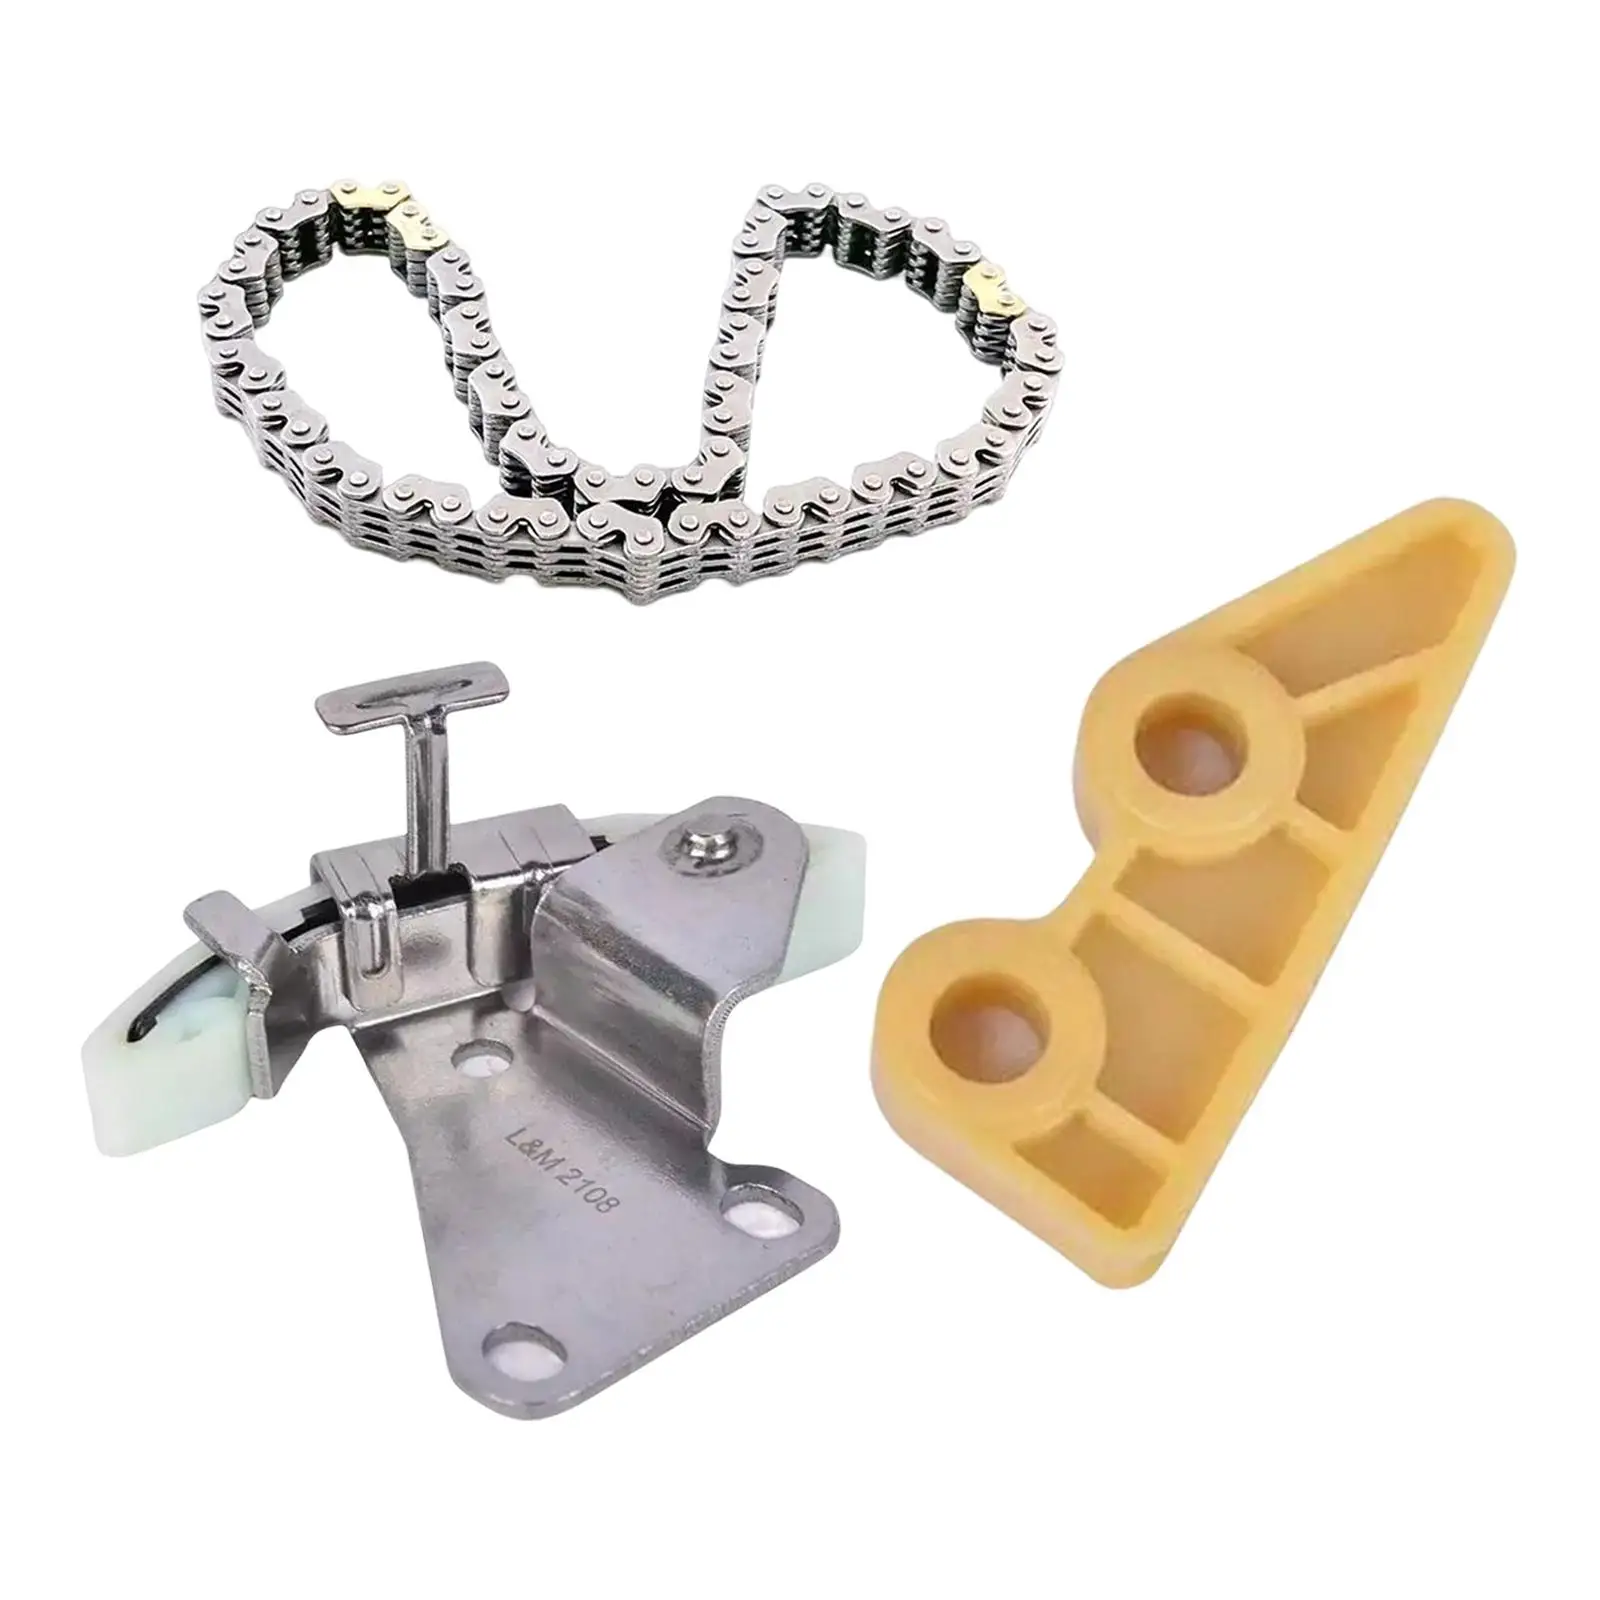 Automobile Oil Pump Chain Tensioner Guide Kit 13460-Pnc-004 for Honda Replaces Stable Performance Easily Install Durable